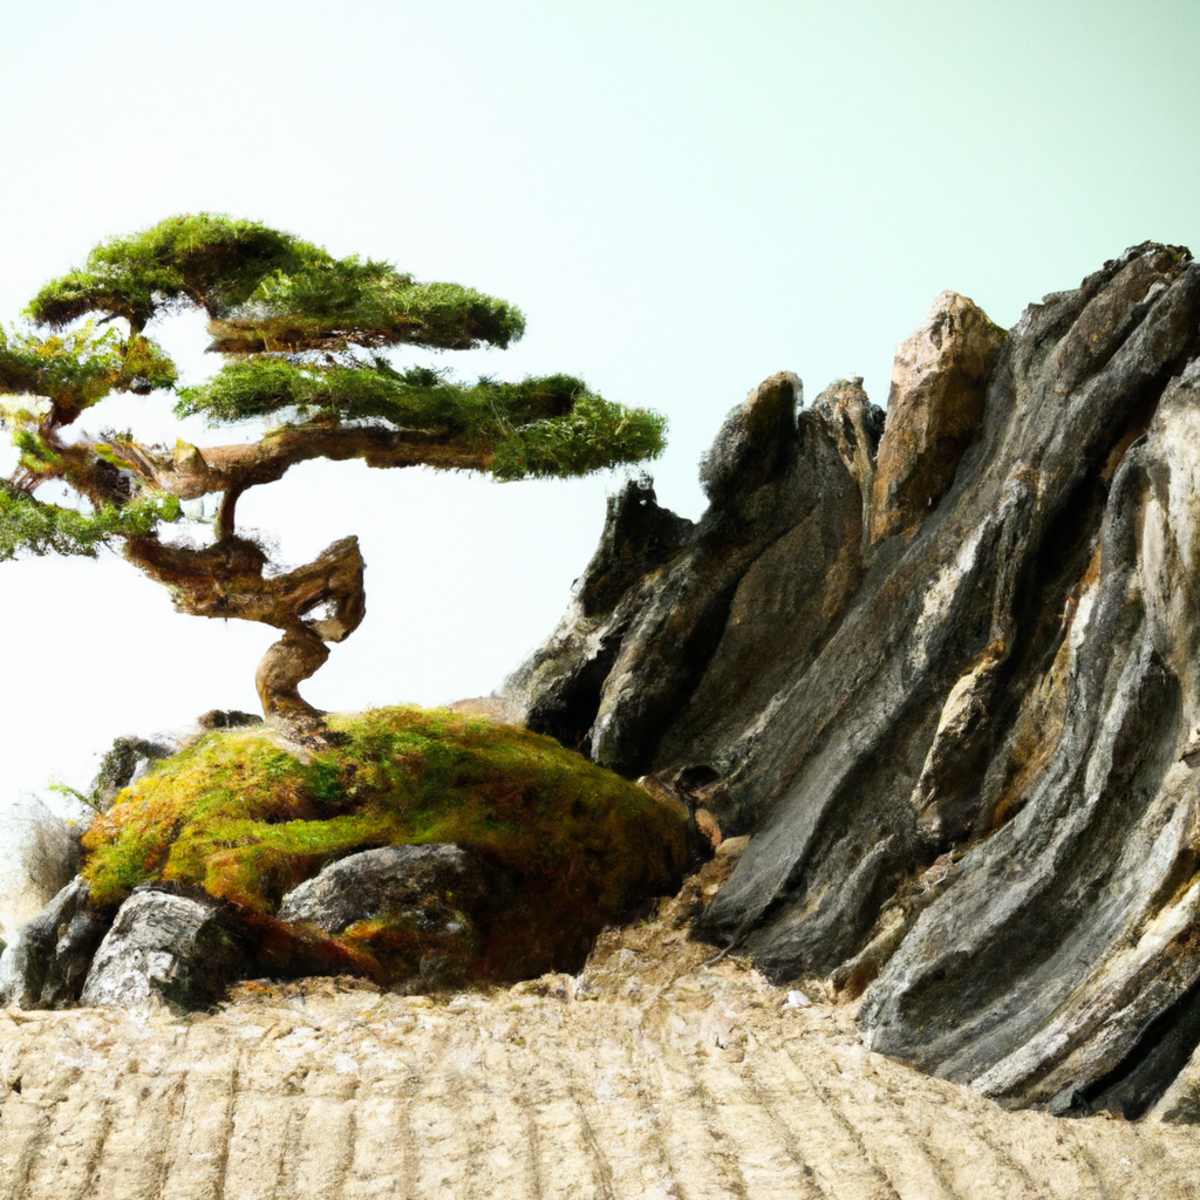 Zen garden with raked sand, pebbles, bonsai trees, and meditation cushion, showcasing mindfulness for stress relief.